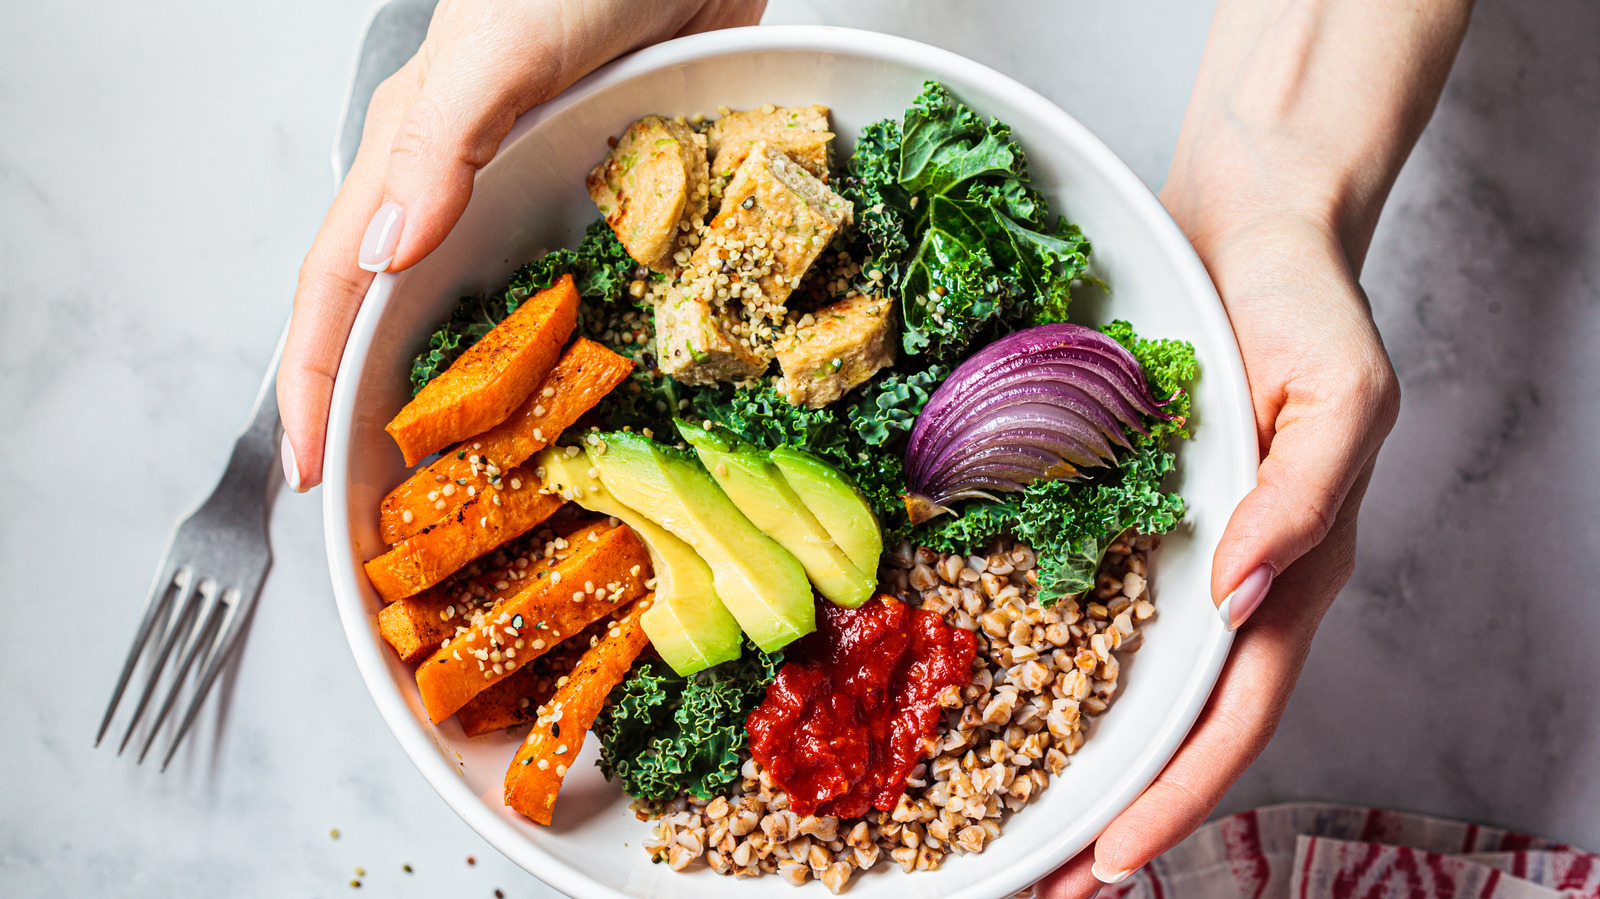 https://www.tastingtable.com/img/gallery/20-vegan-ingredients-you-need-to-spruce-up-your-grain-bowls/l-intro-1684165813.jpg